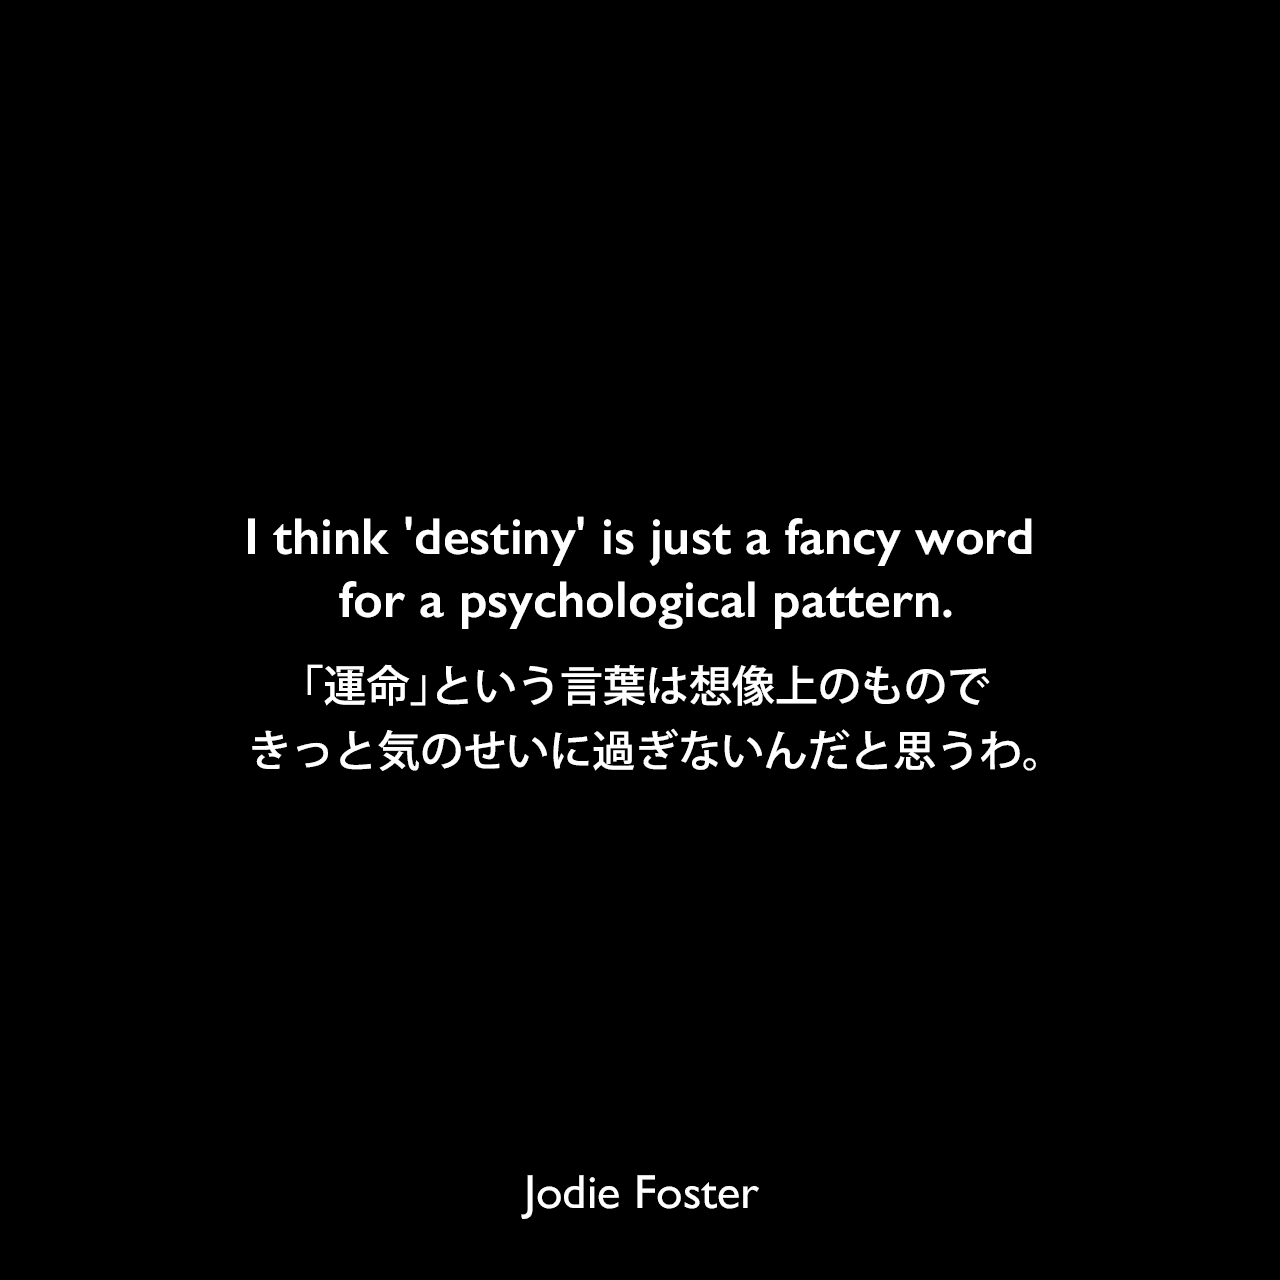 I think 'destiny' is just a fancy word for a psychological pattern.「運命」という言葉は想像上のものできっと気のせいに過ぎないんだと思うわ。Jodie Foster